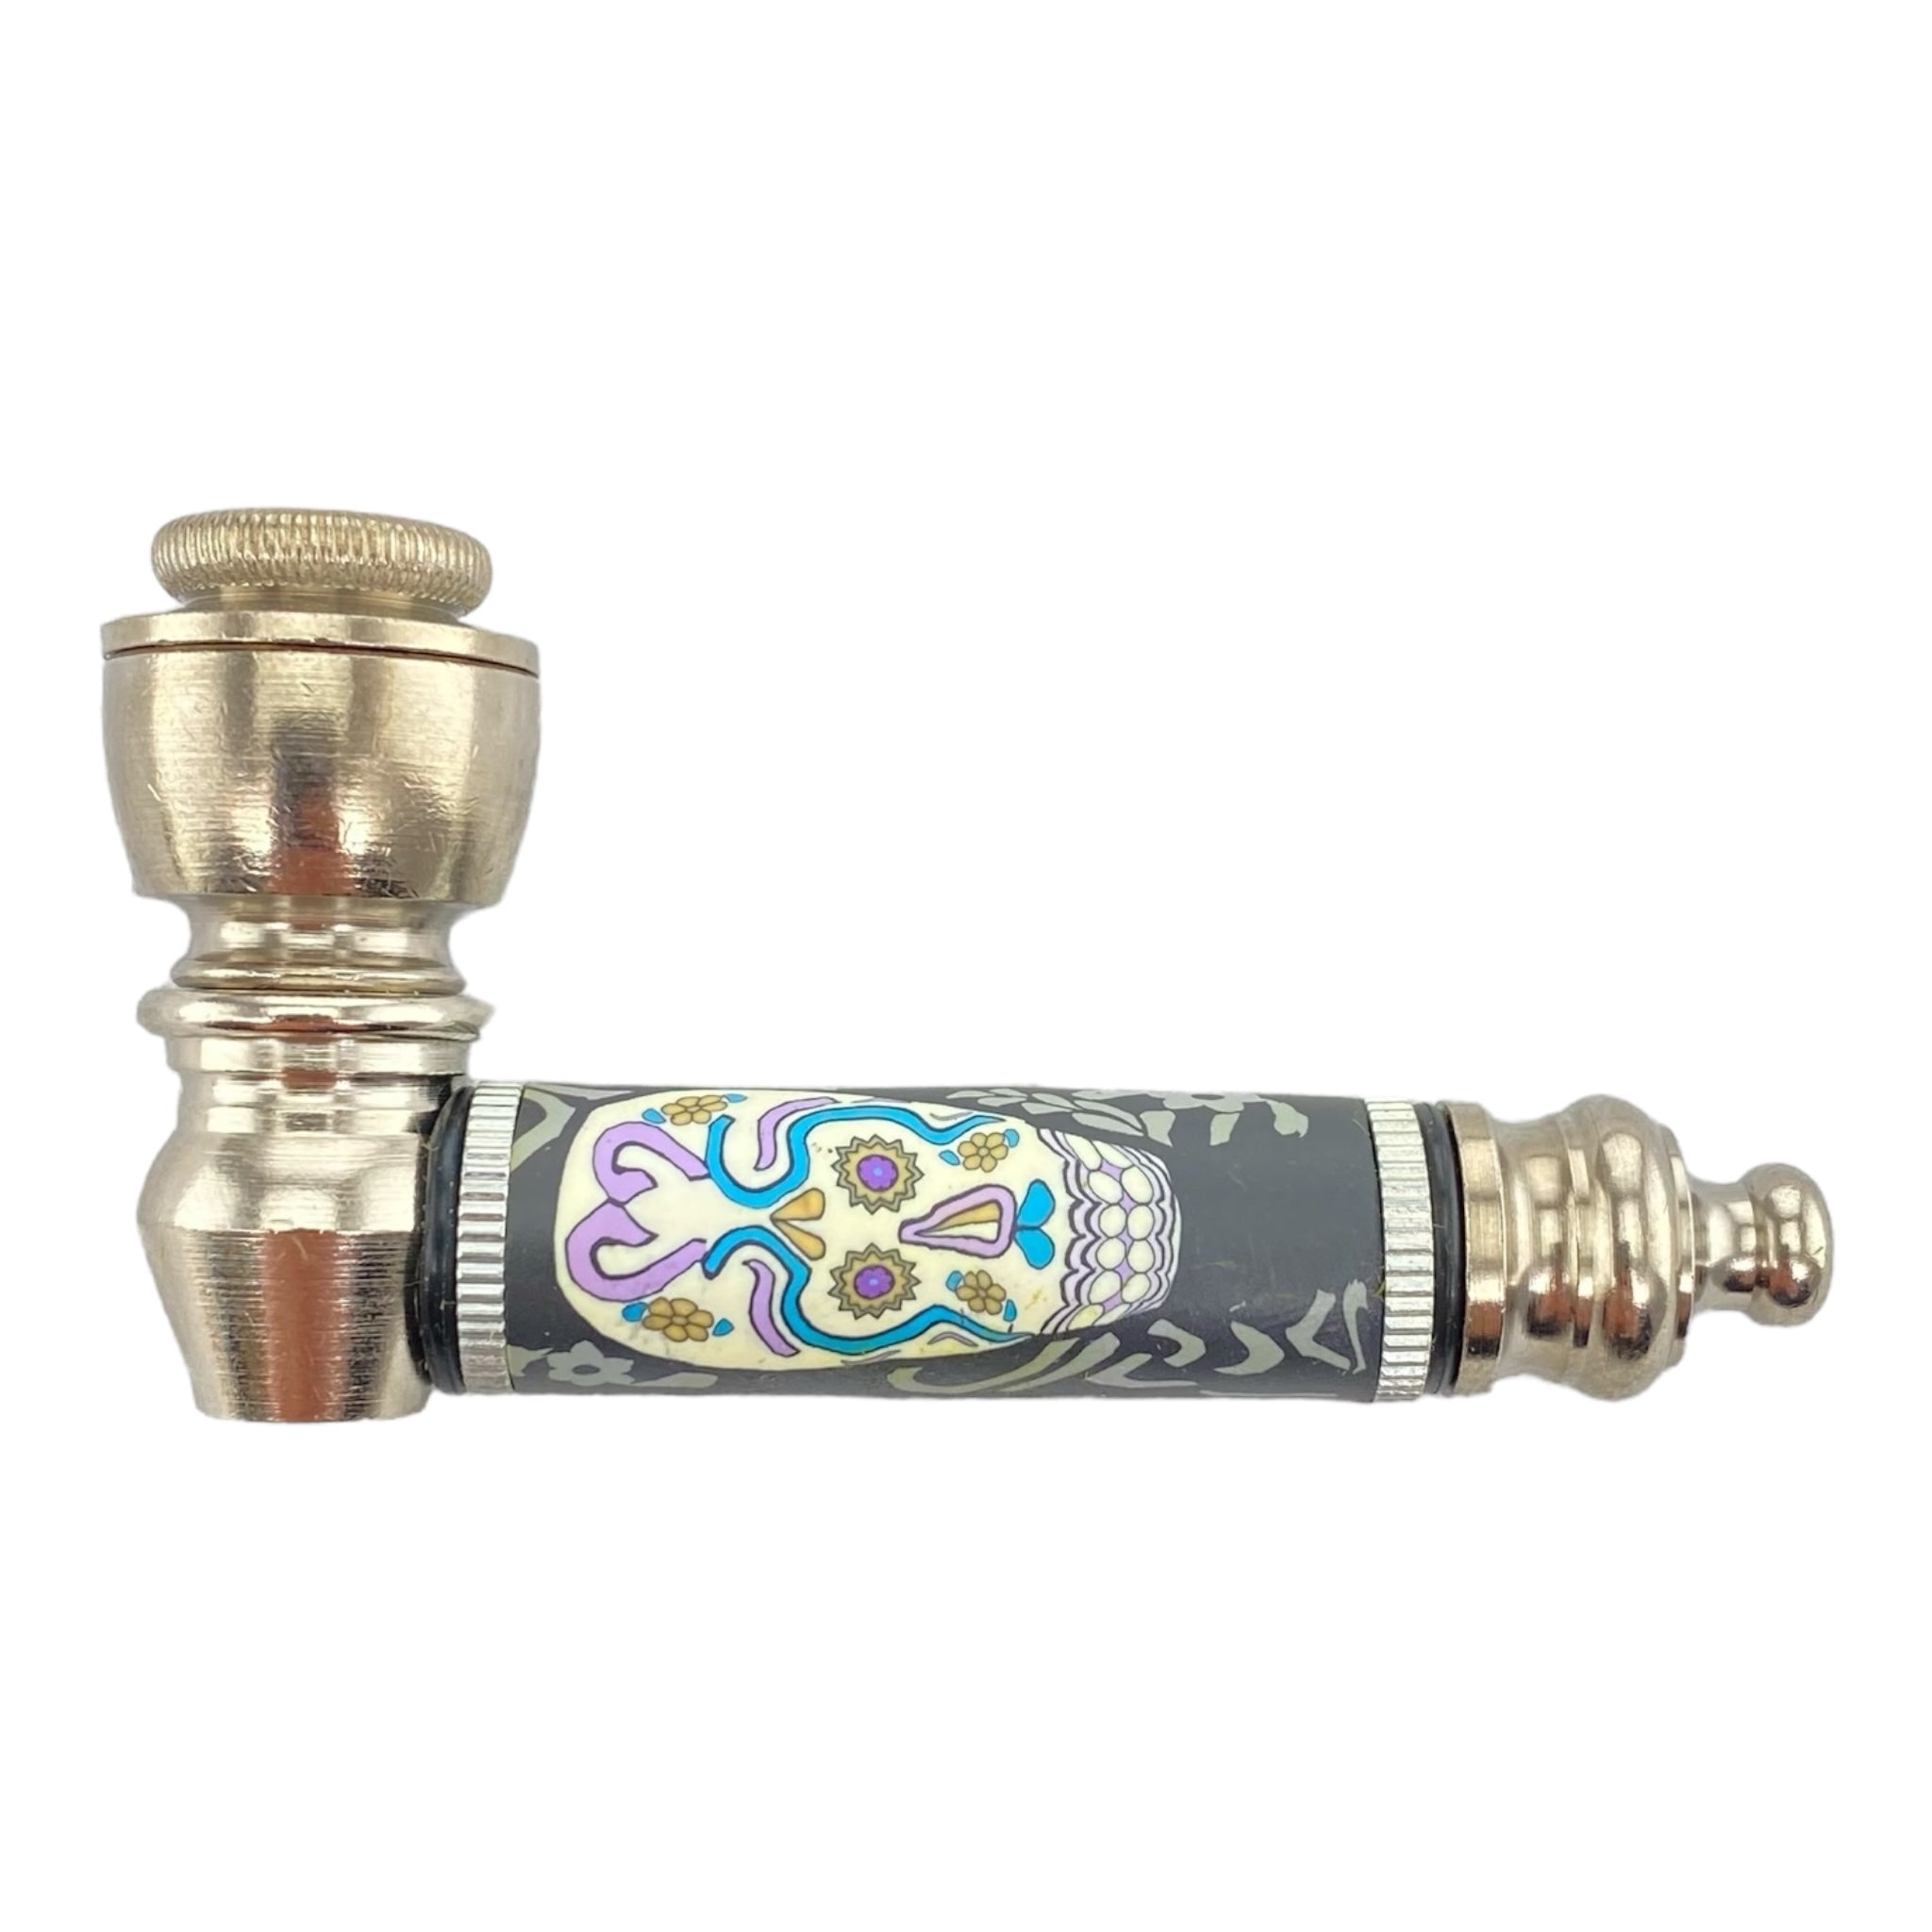 Metal Hand Pipes - Silver And Black Hand Pipe With Purple Candy Skull